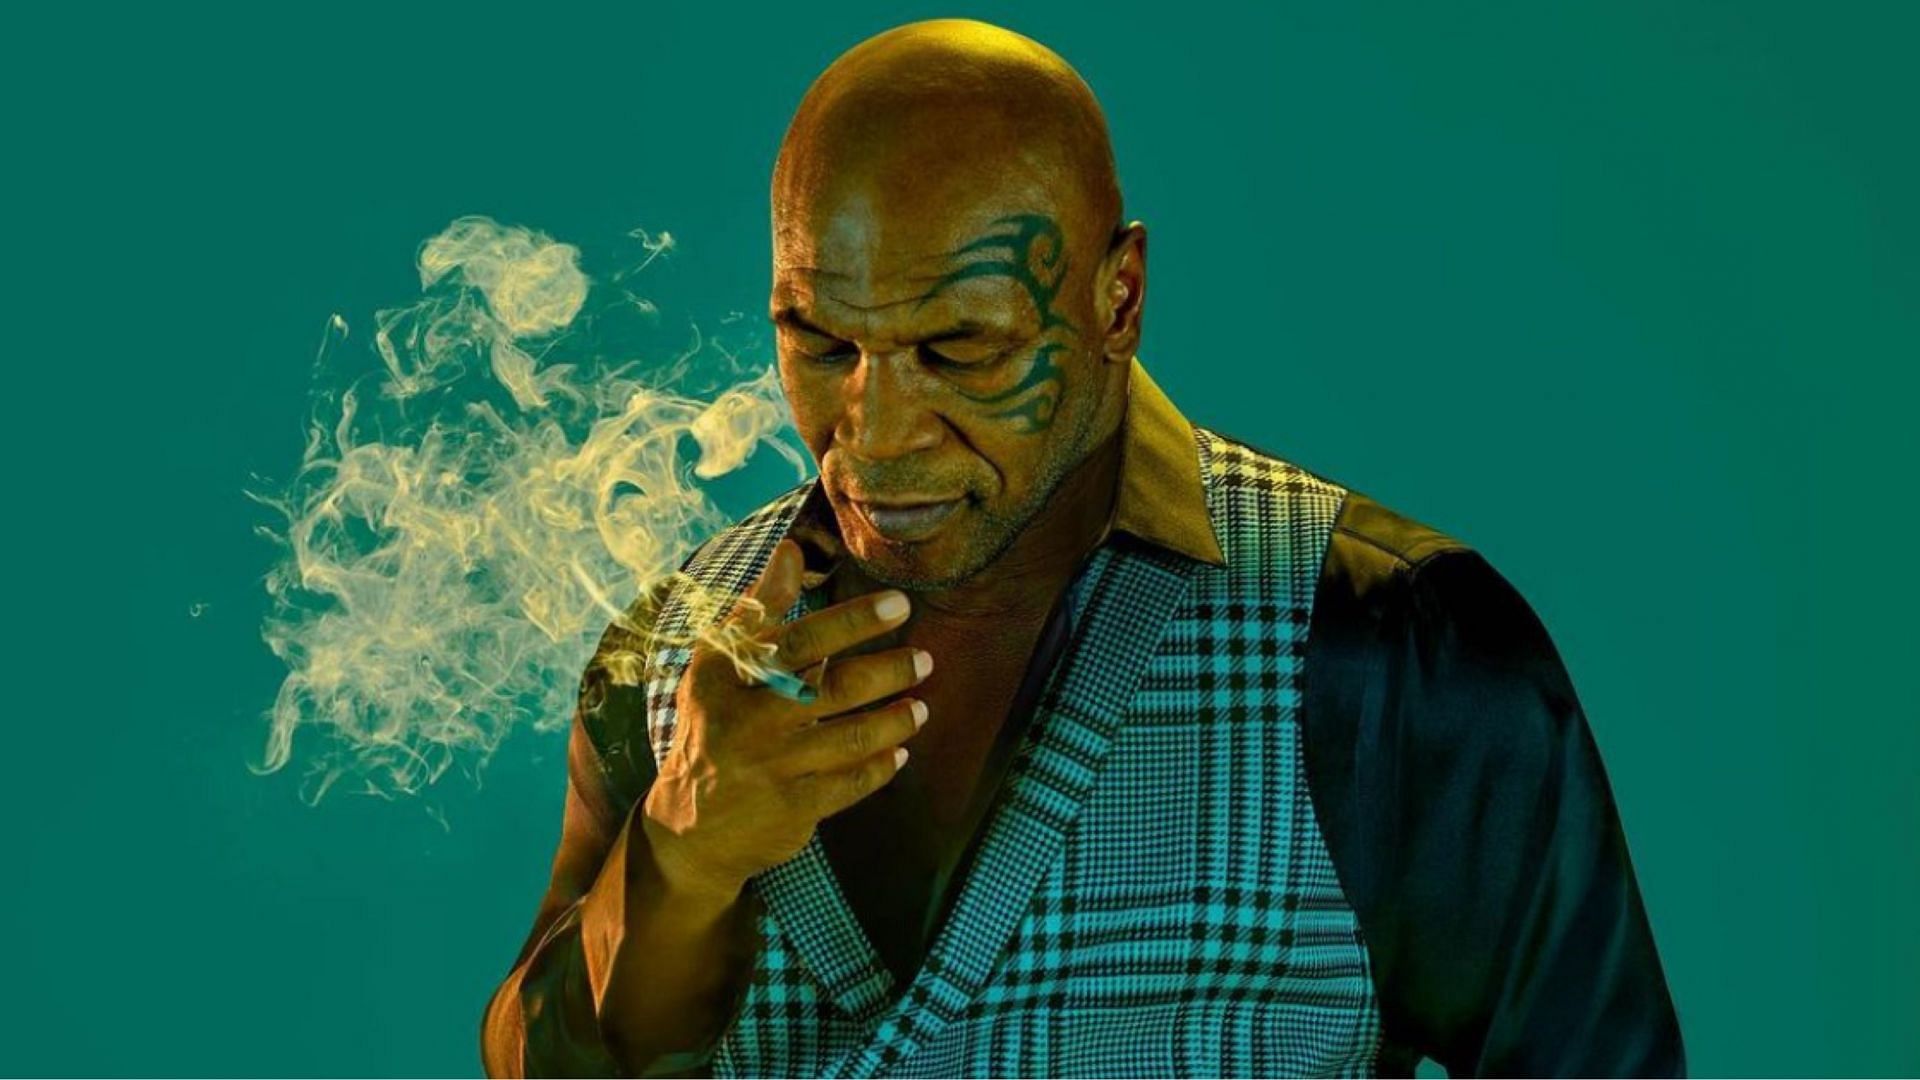 Mike Tyson (@miketyson) [image courtesy of Instagram]